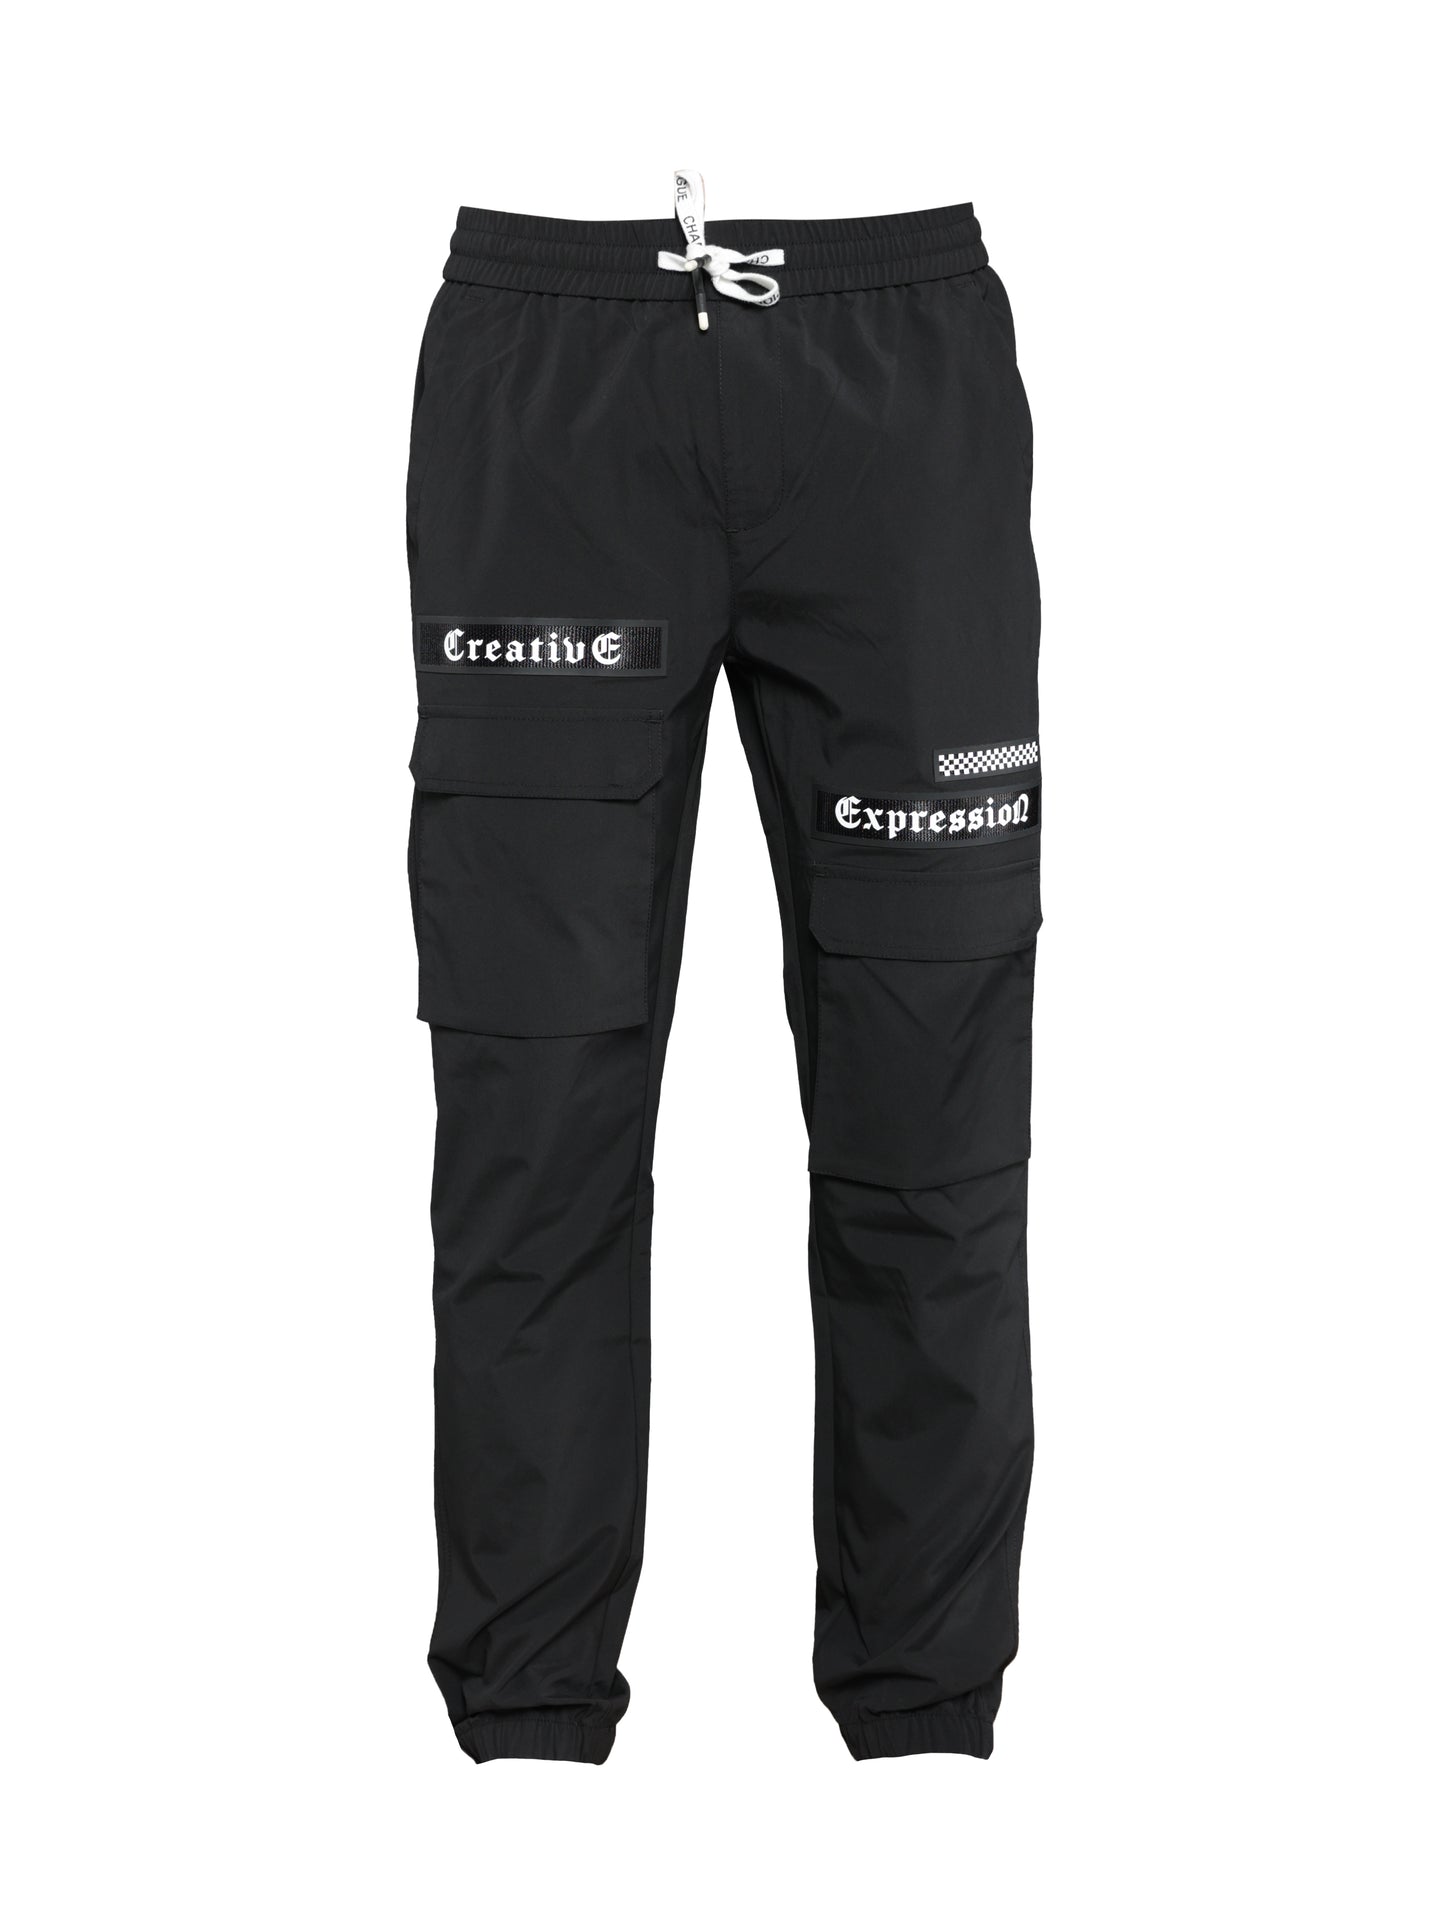 "Creative Expression" Joggers